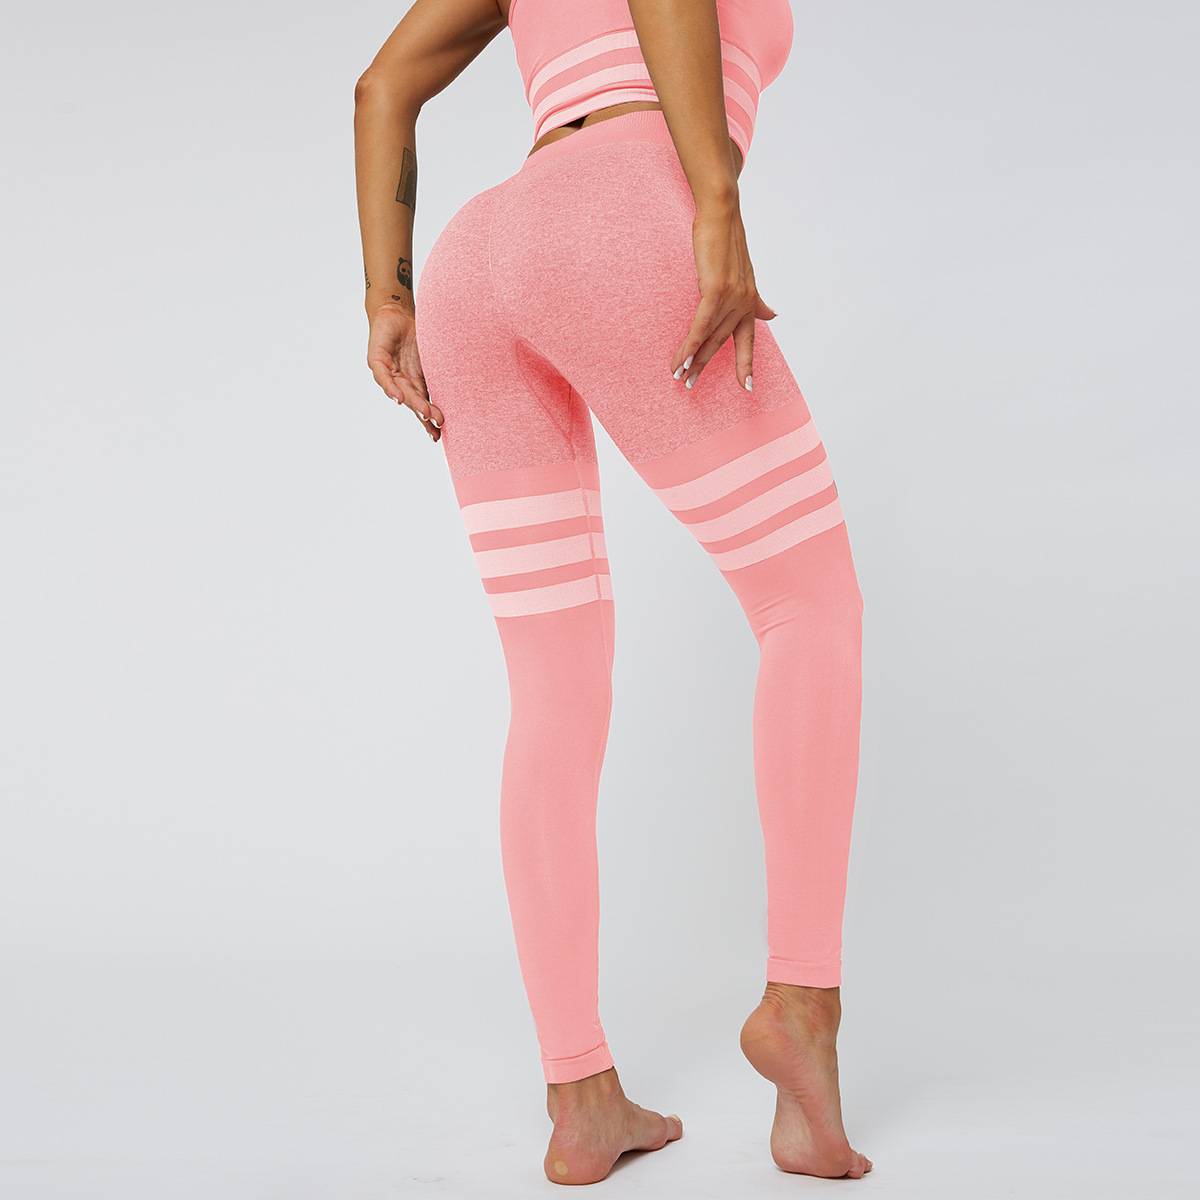 Sexy Peach Hip High Waist Yoga Pants Women39s Knitted Seamless Breathable Striped Yoga Fitness Leggingspicture21